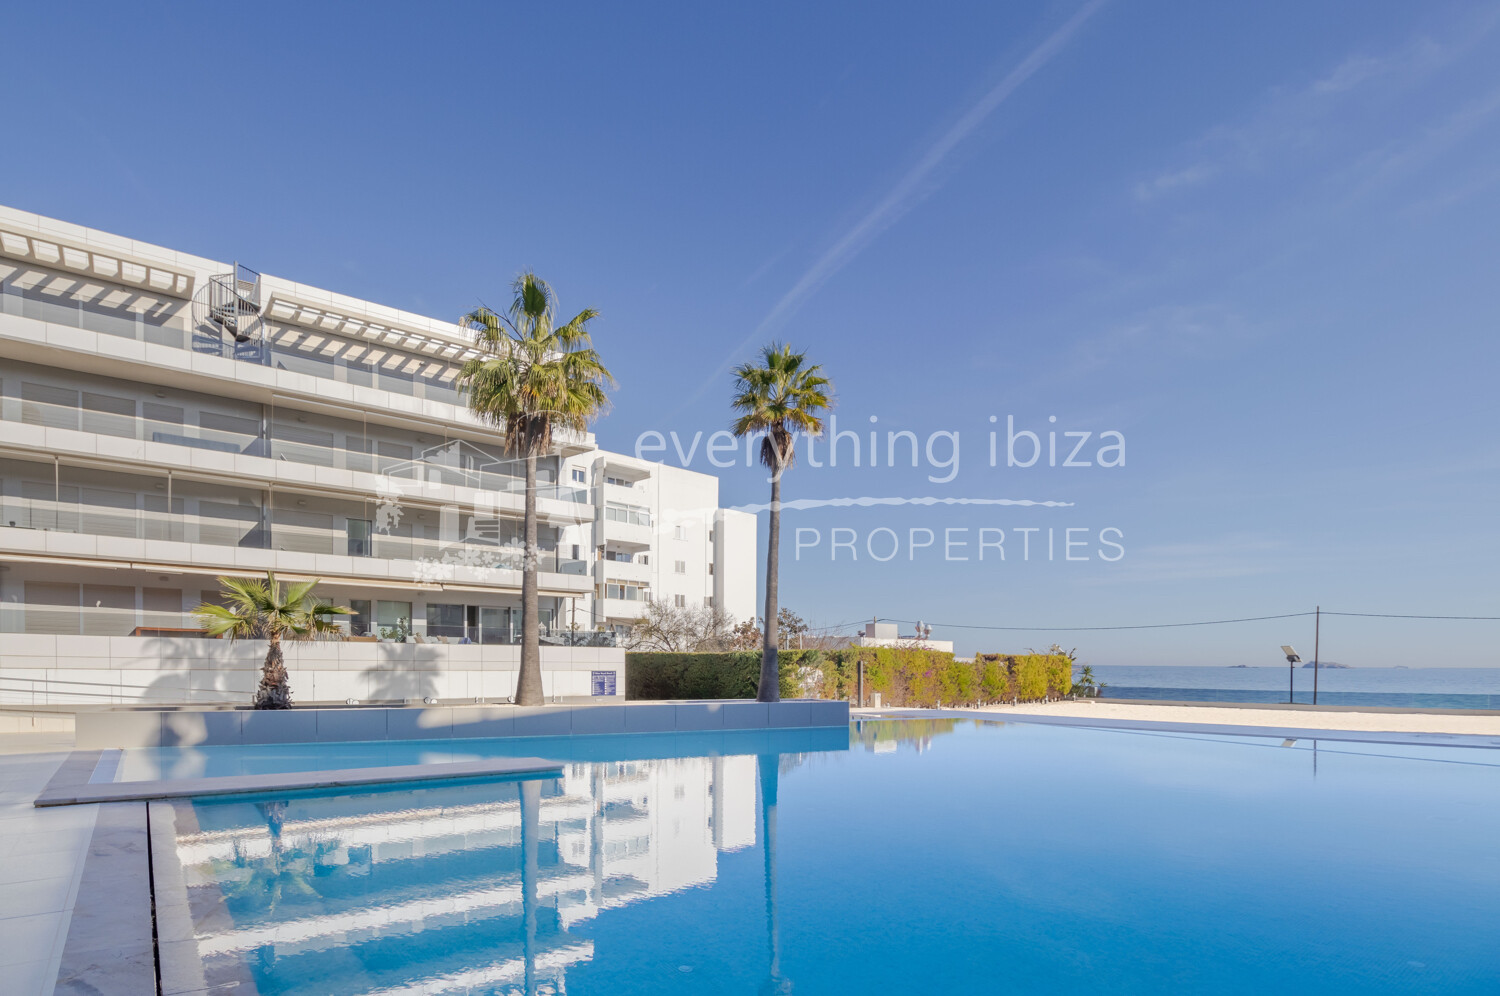 Stylish Furnished Beachfront Apartment in Exclusive Community Near Ibiza Town, ref. 1674, for sale in Ibiza by everything ibiza Properties